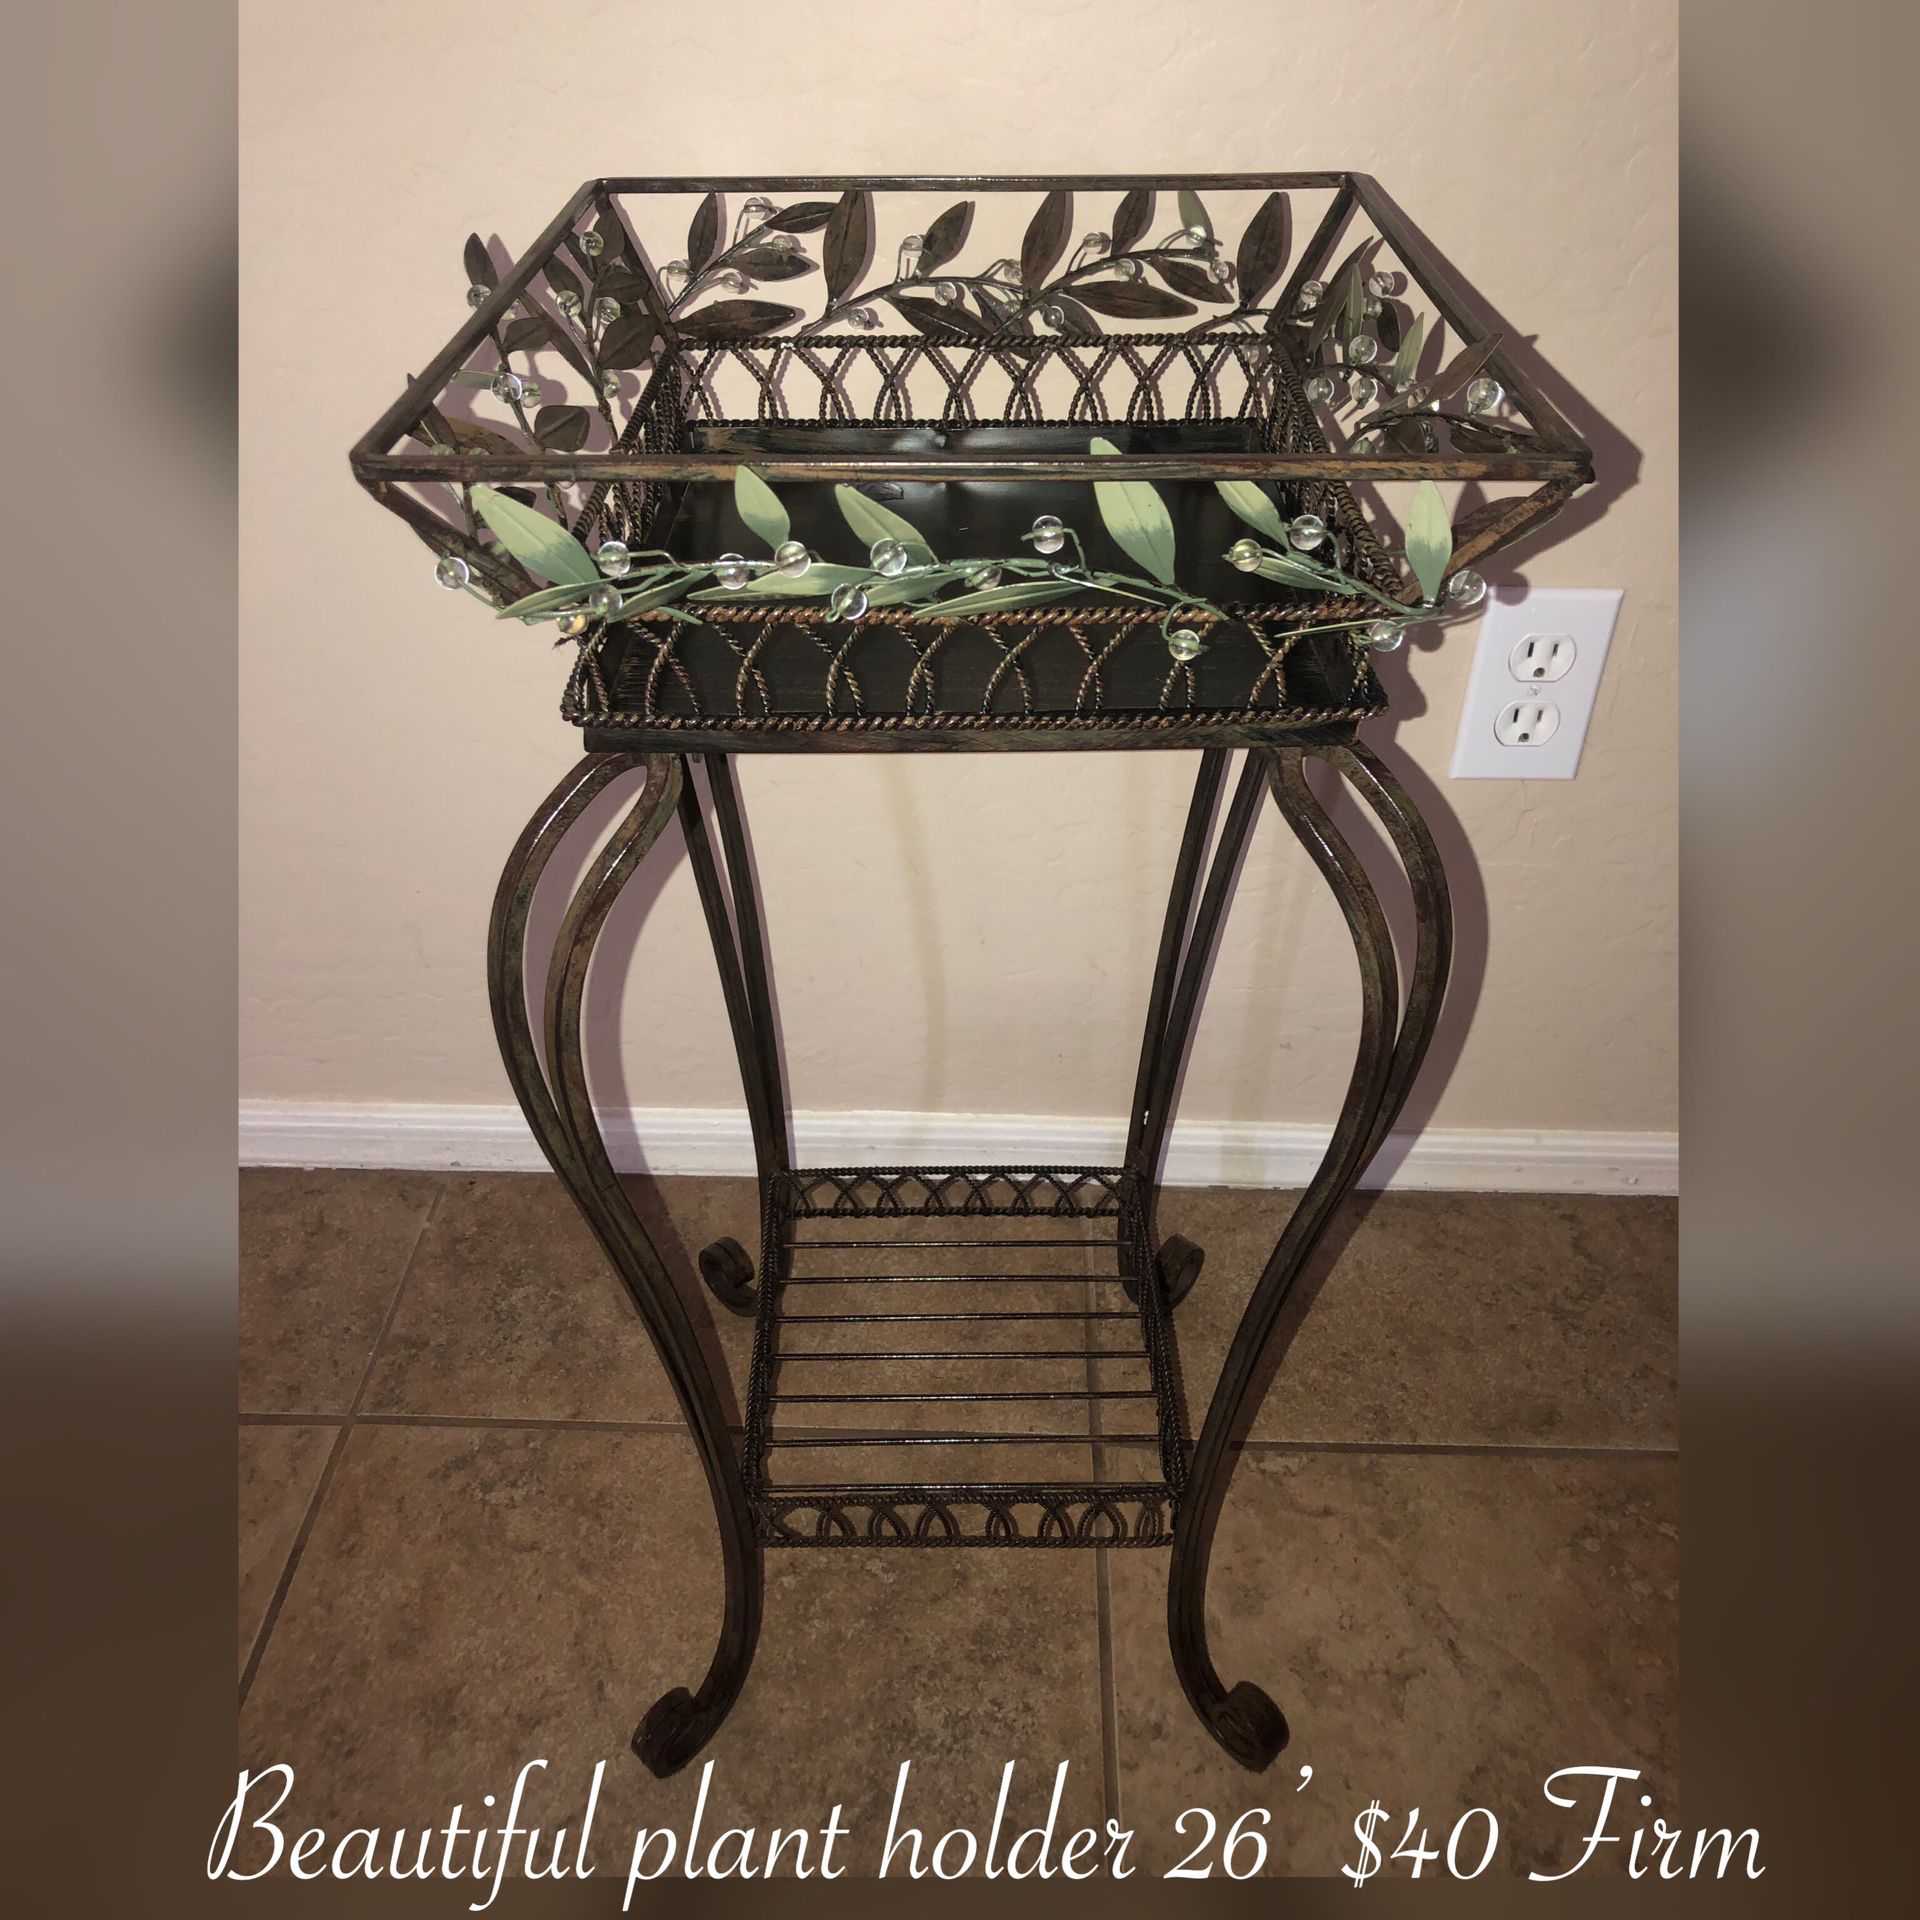 New beautiful plant holder 26’ $35 Firm